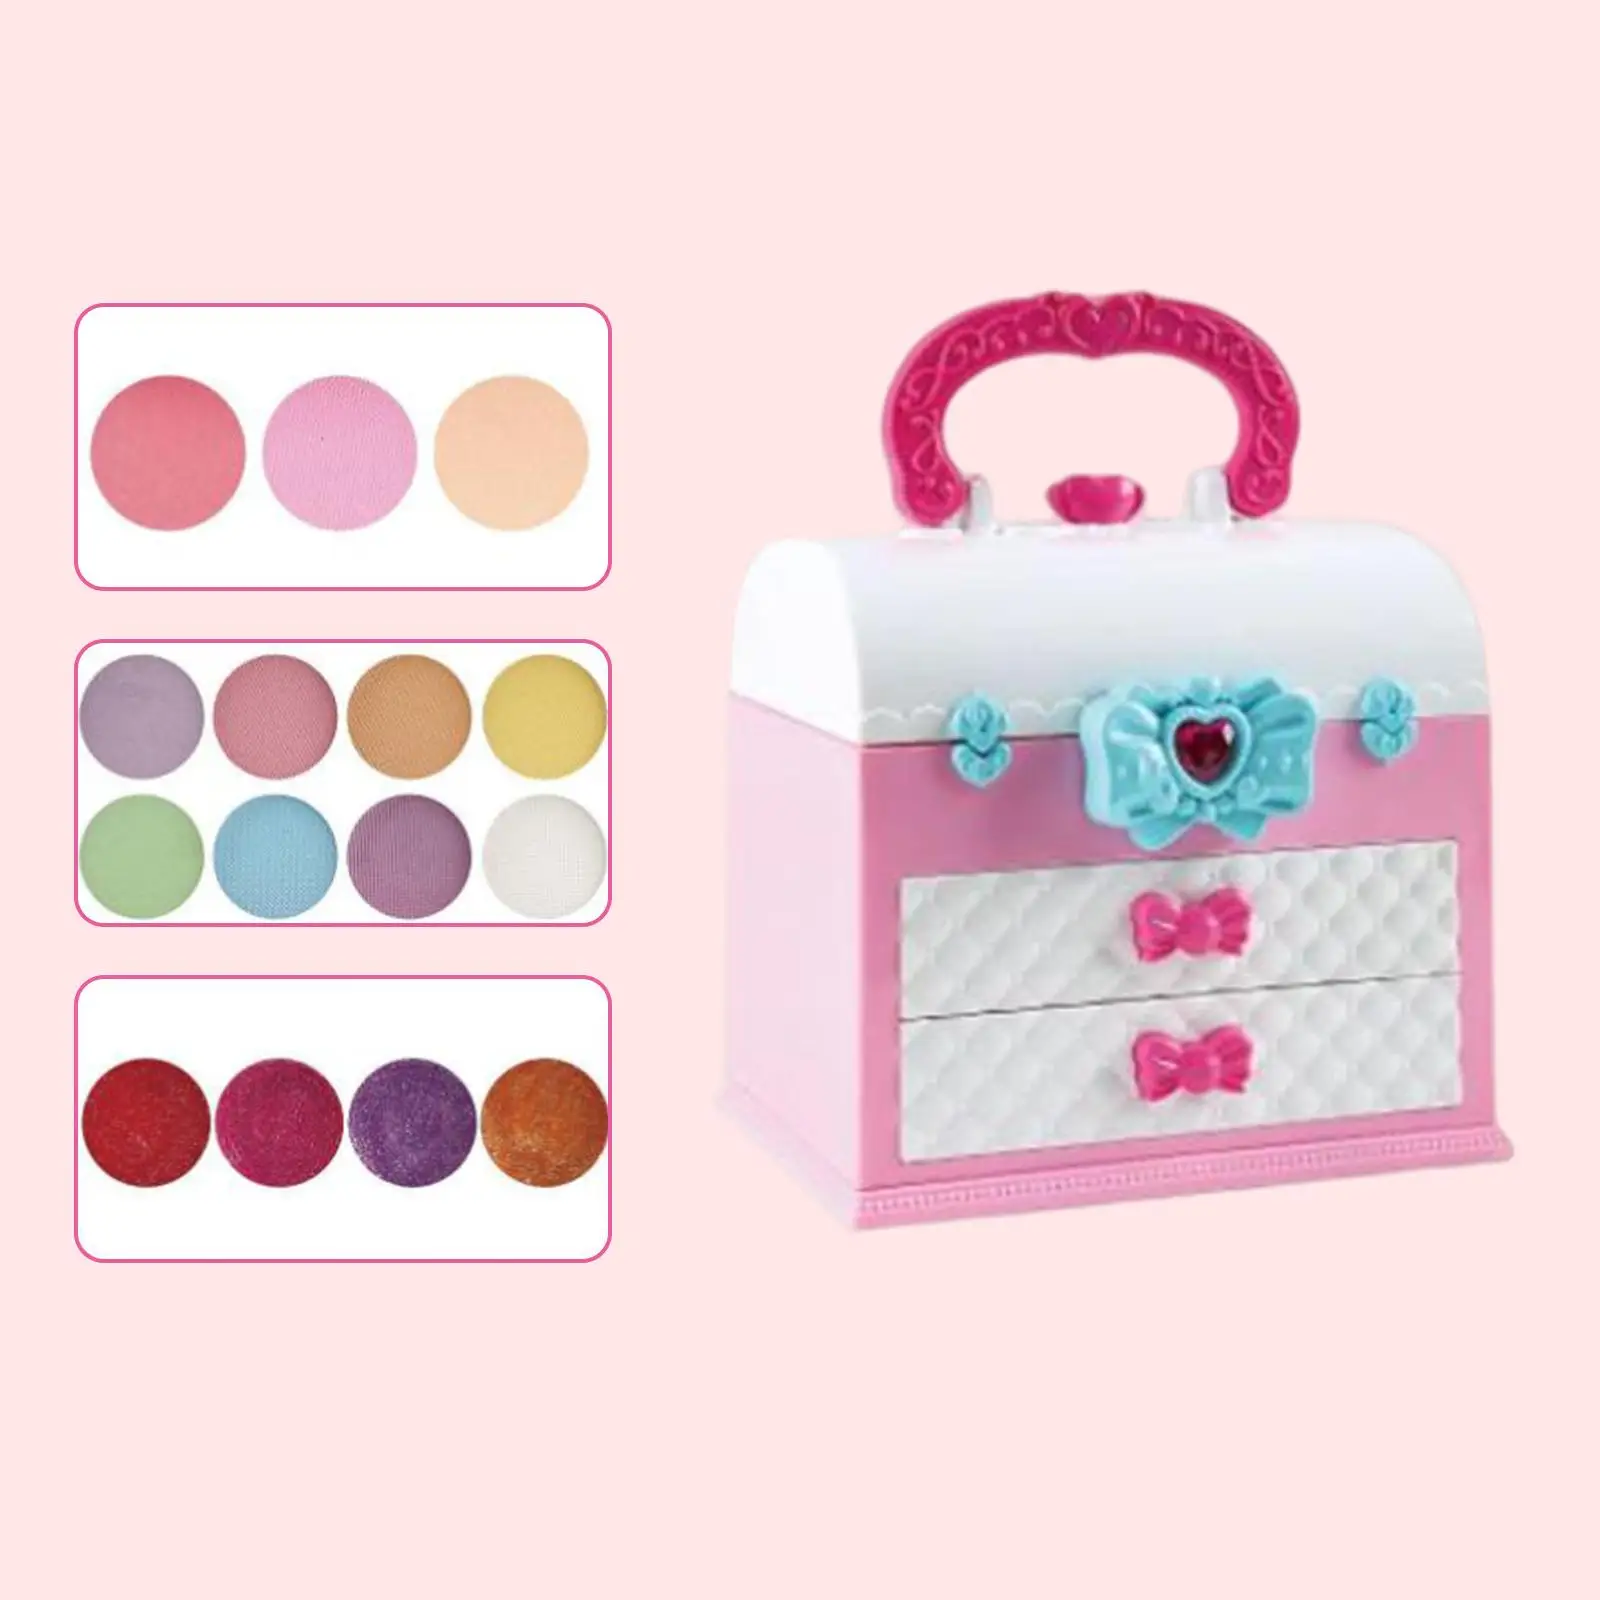 Kids Play Makeup Set Blush, Lipstick,Brush, and Eyeshadow Set with Cosmetic Case